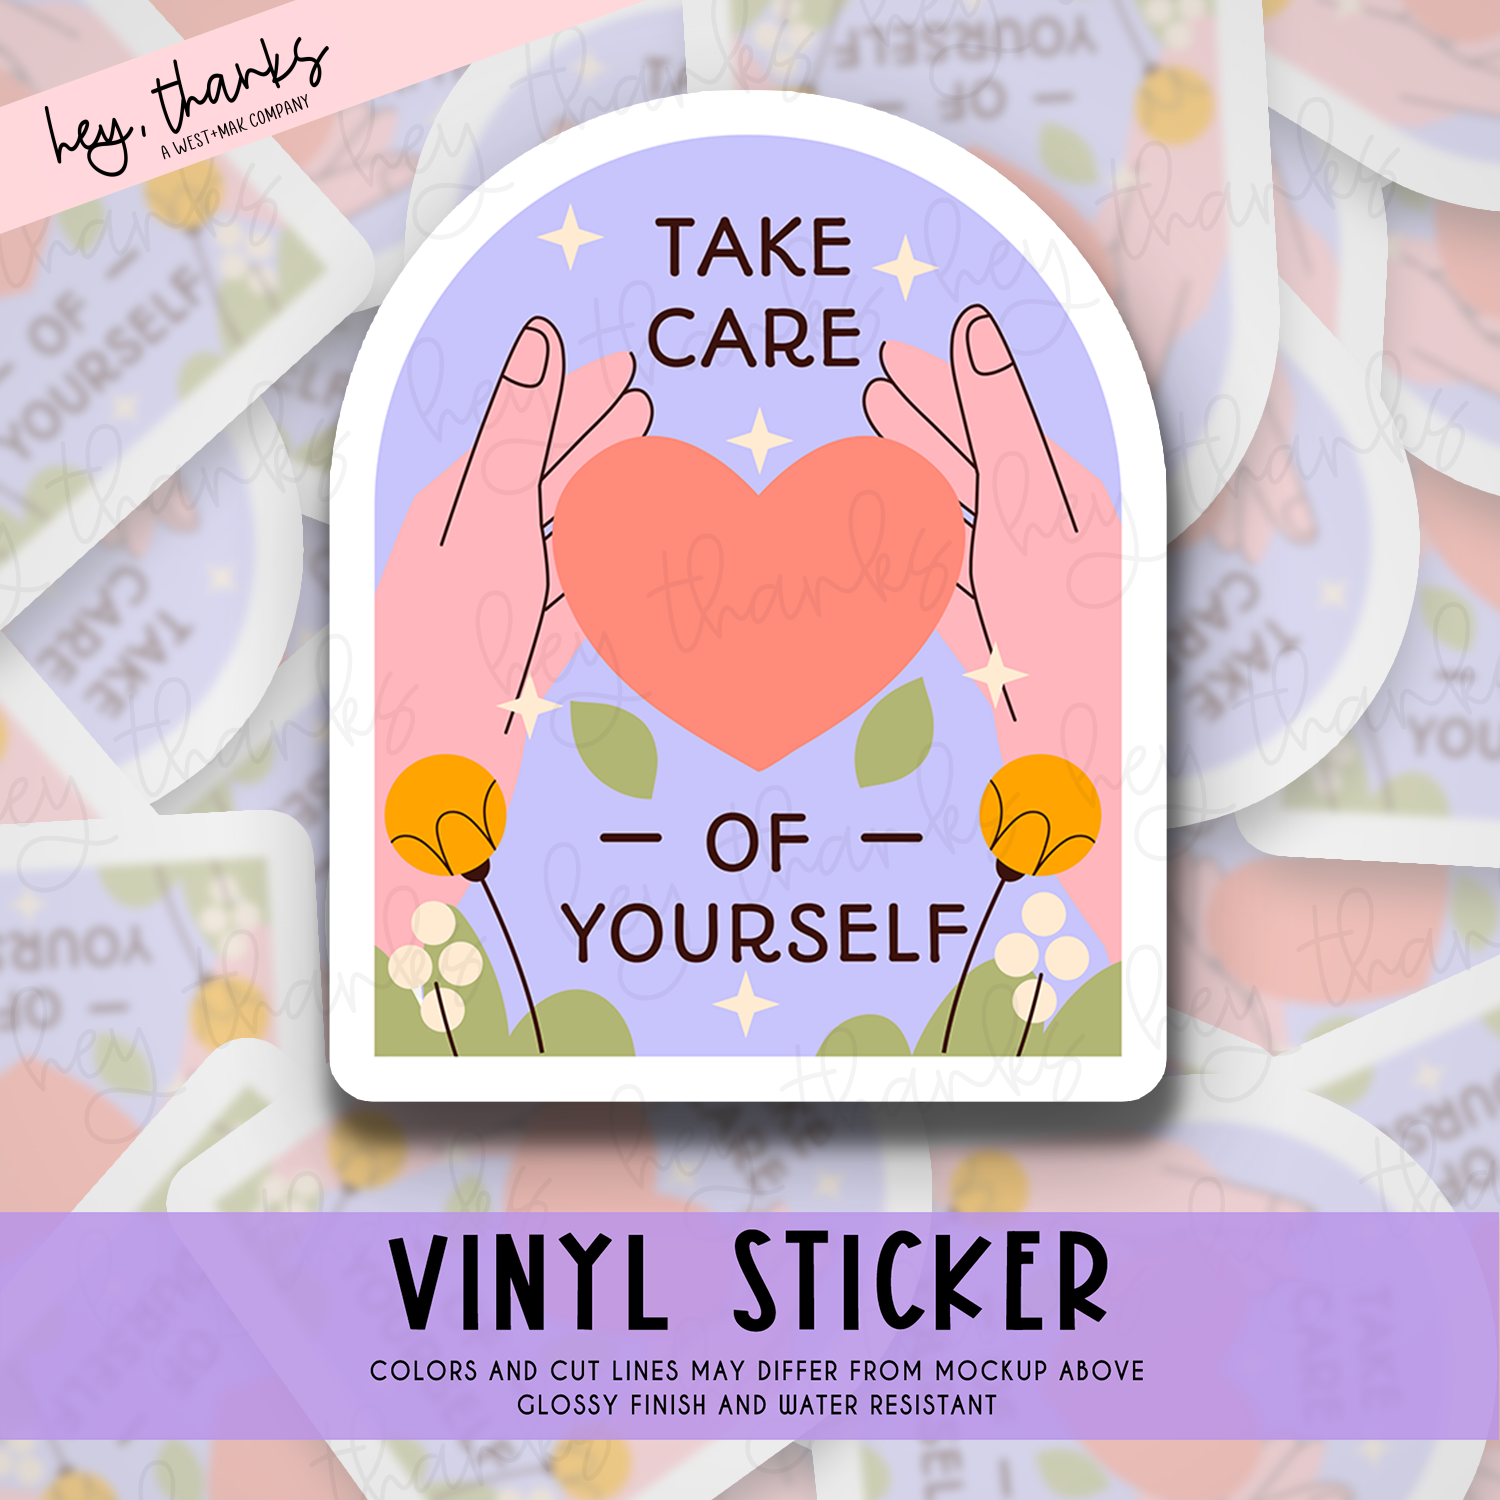 Take Care of Yourself - Vinyl Sticker